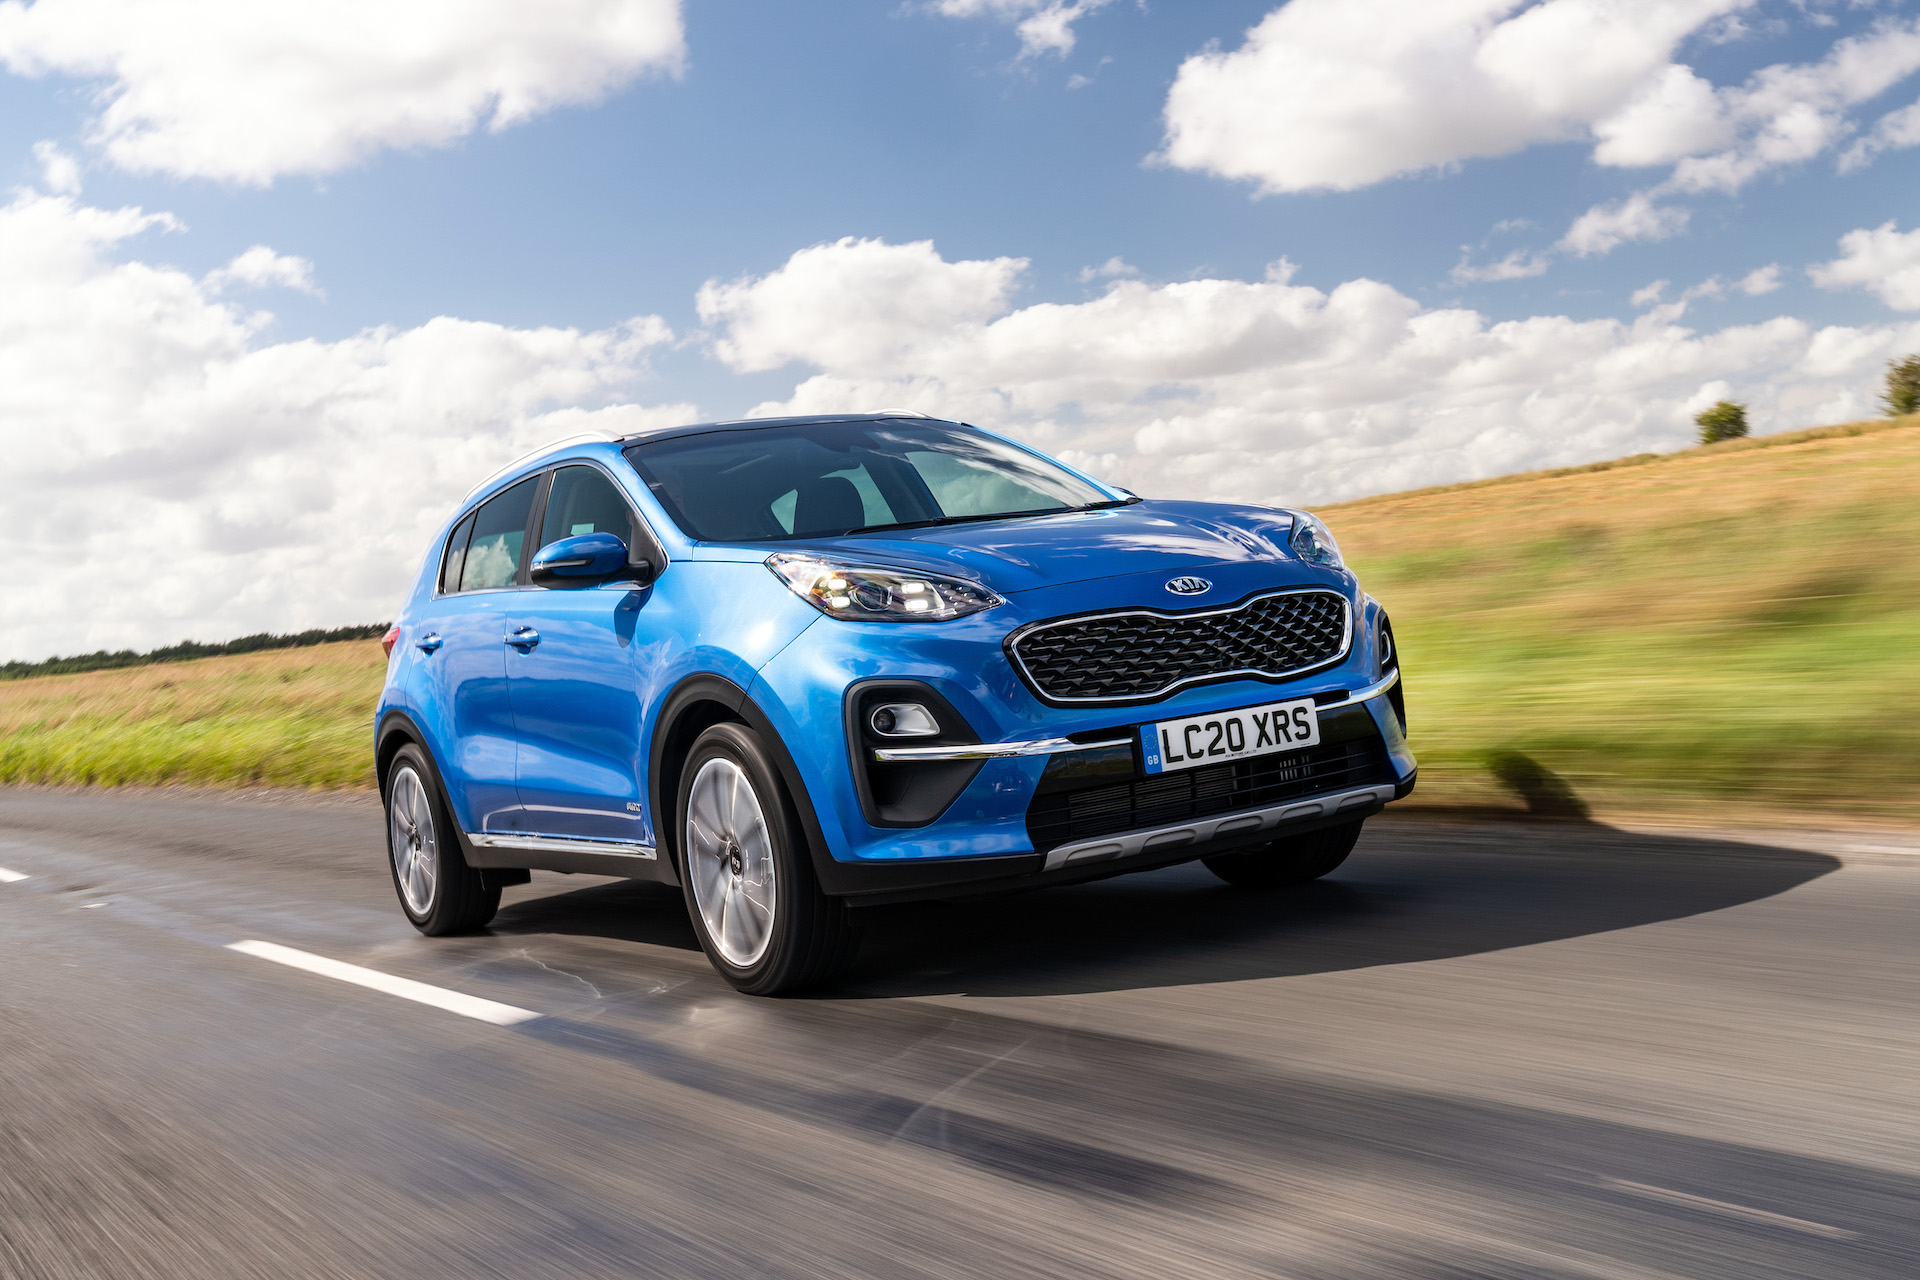 Kia Sportage review: this crossover was born to be mild